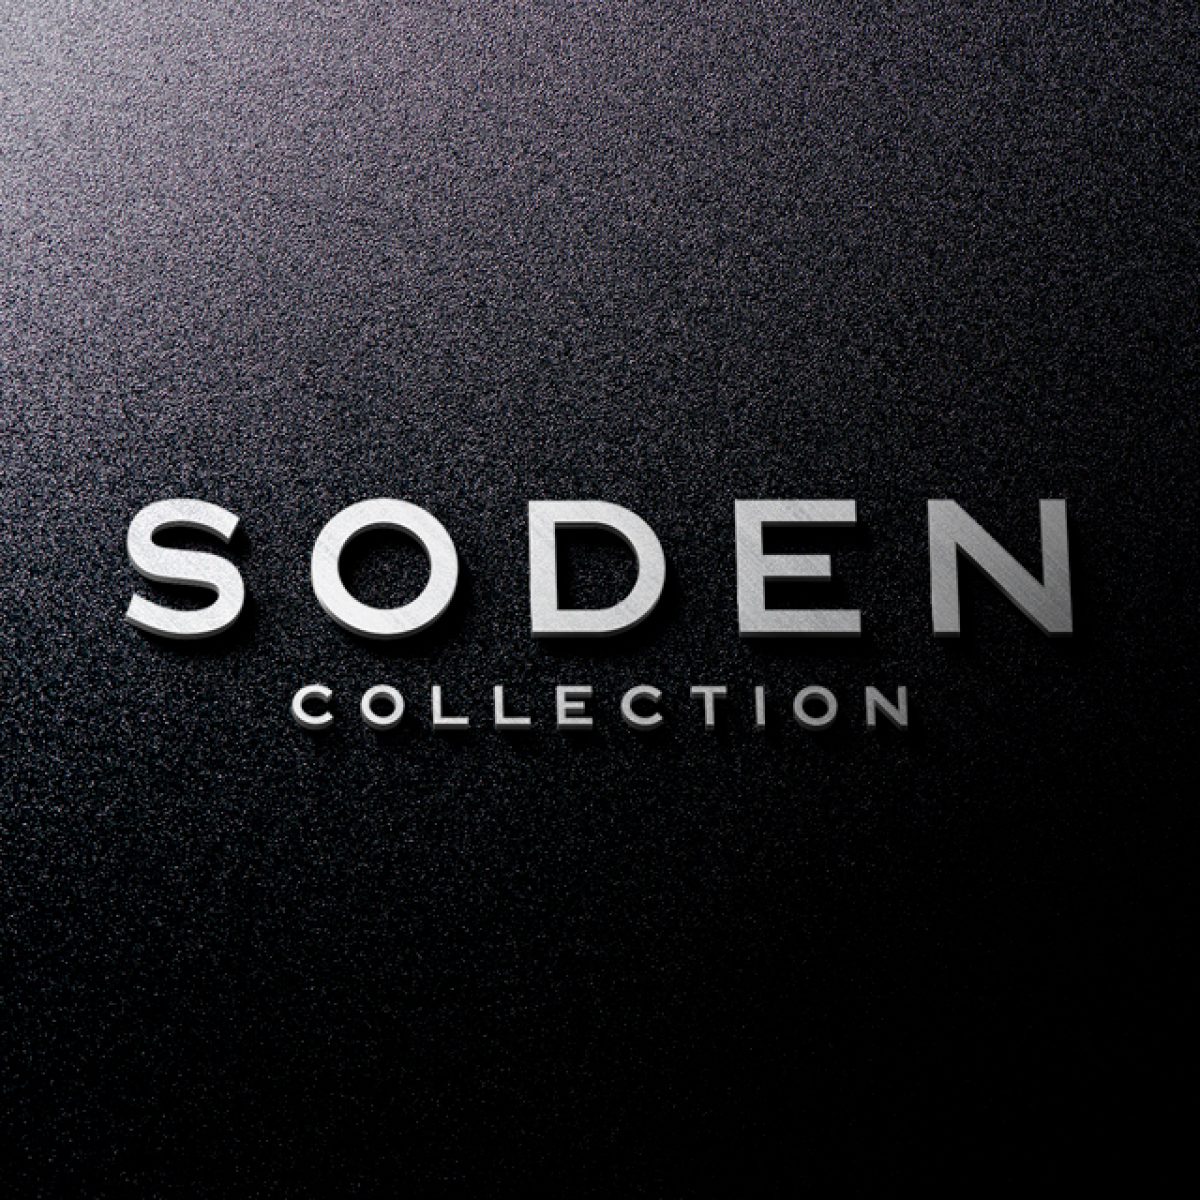 The Soden Collection